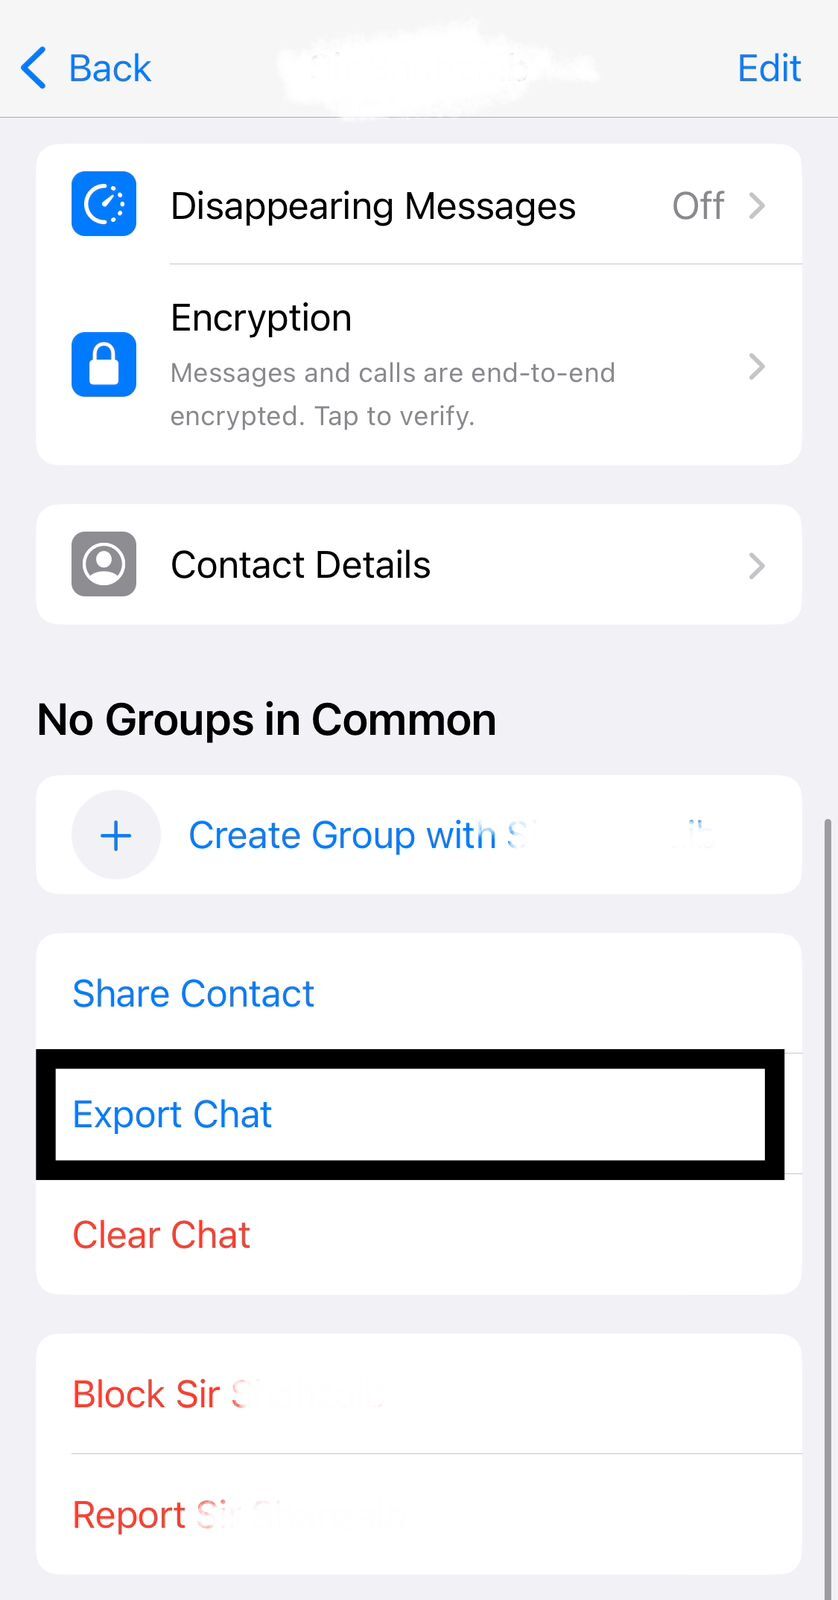 Export chat via email